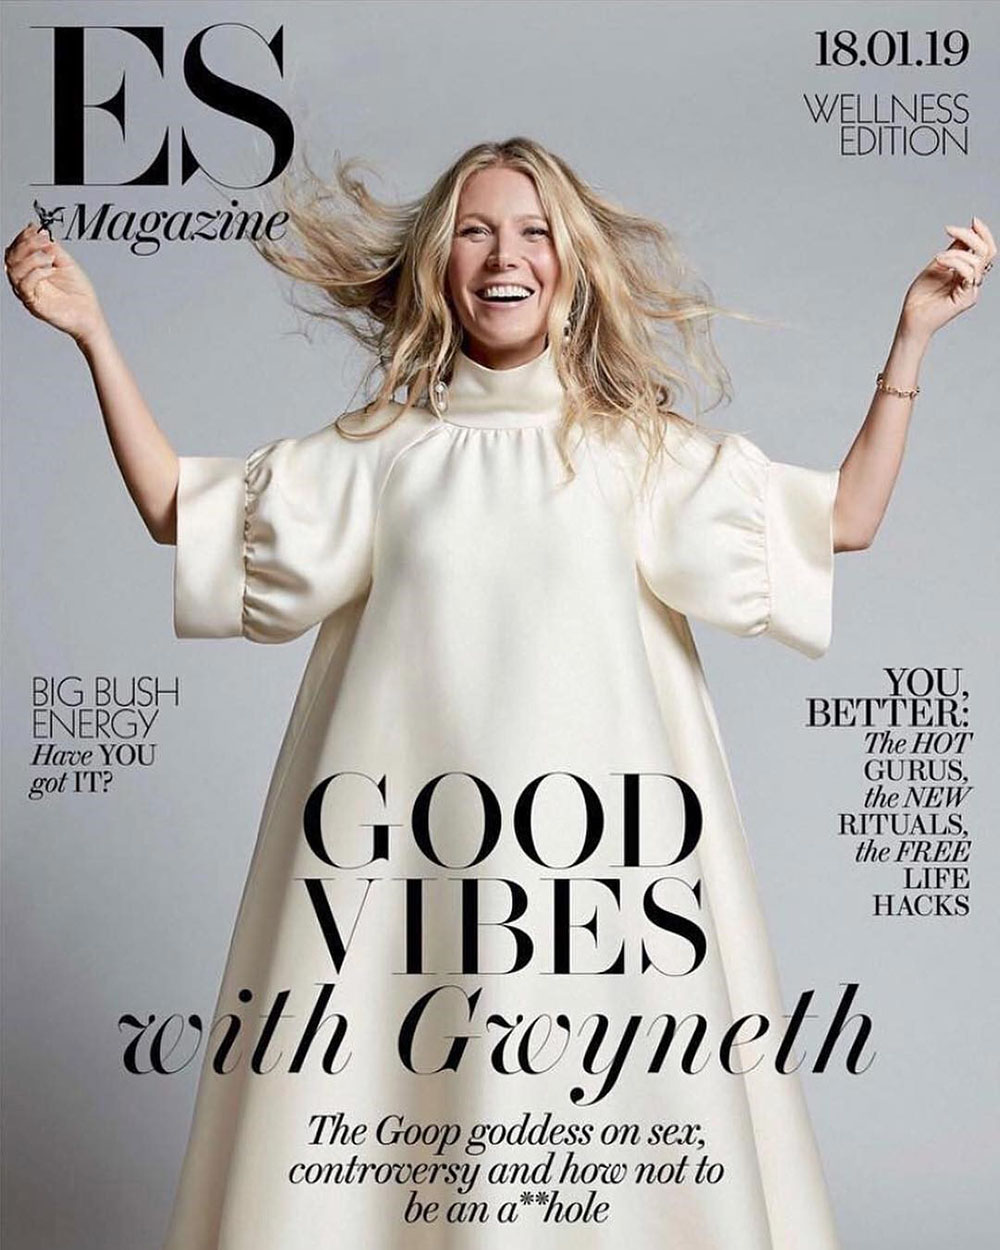 Gwyneth Paltrow covers ES Magazine January 18th, 2019 by Coliena Rentmeester